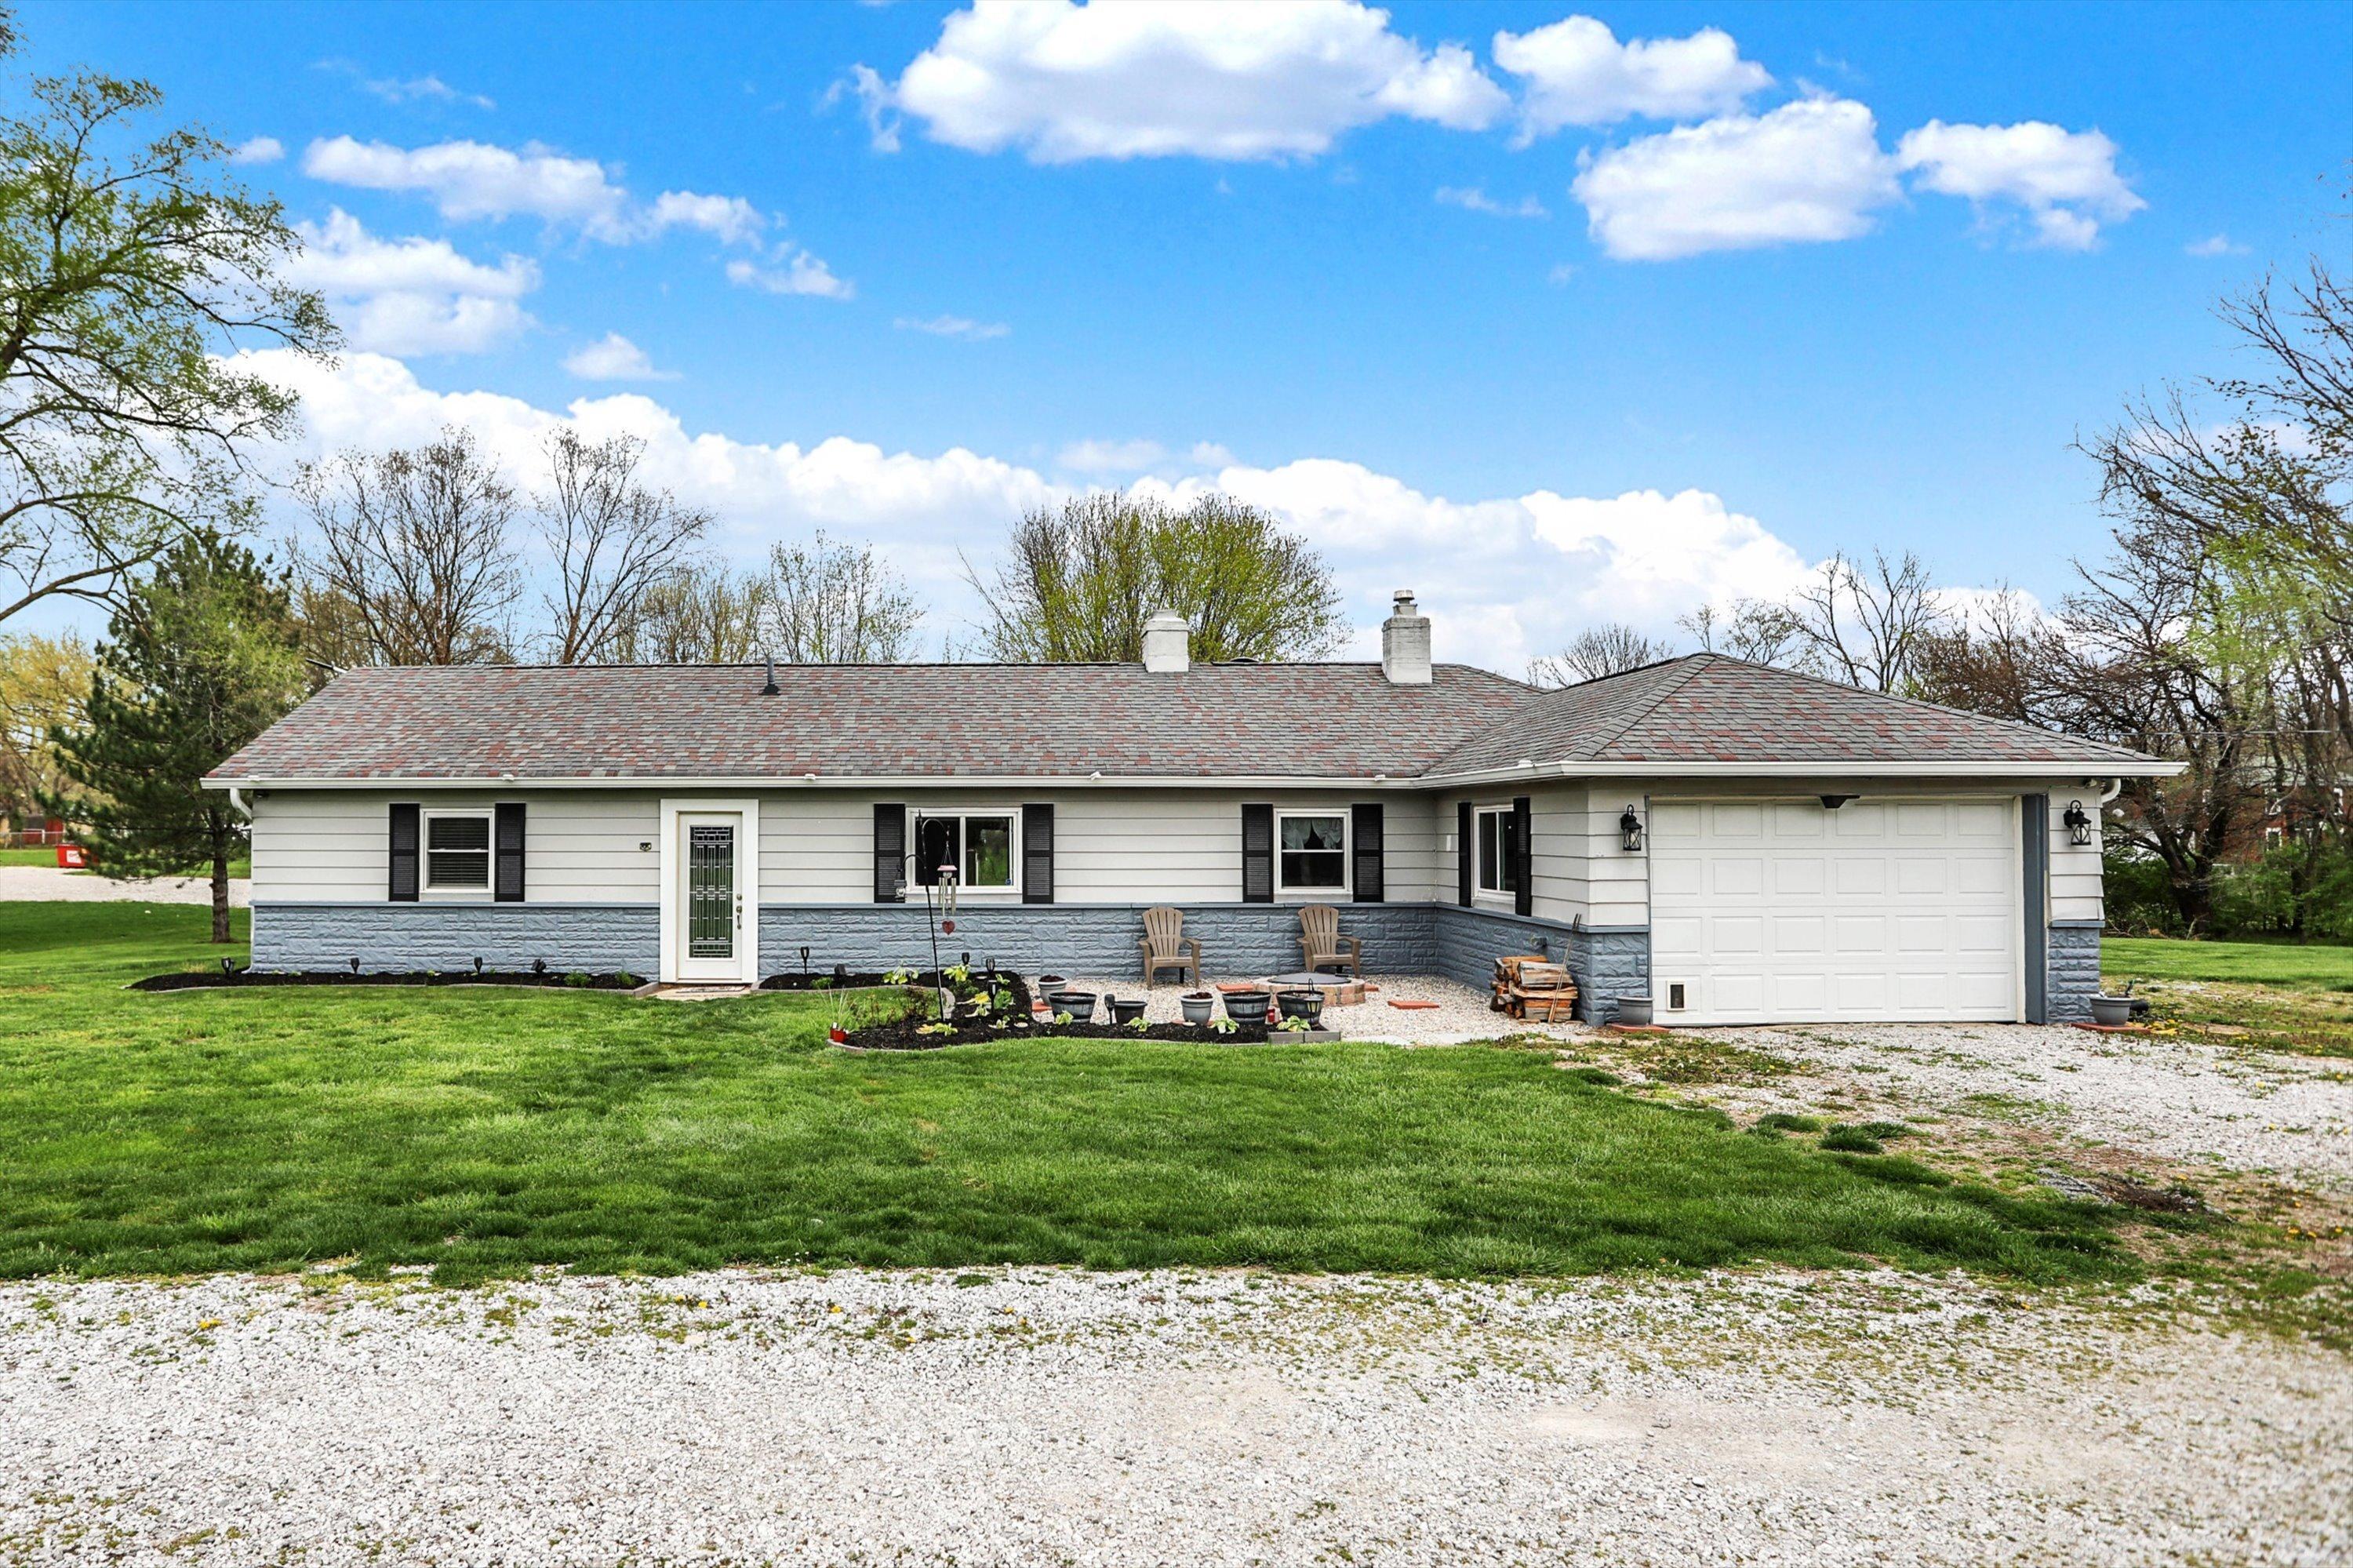 Photo one of 6004 Mills Rd Indianapolis IN 46221 | MLS 21972774